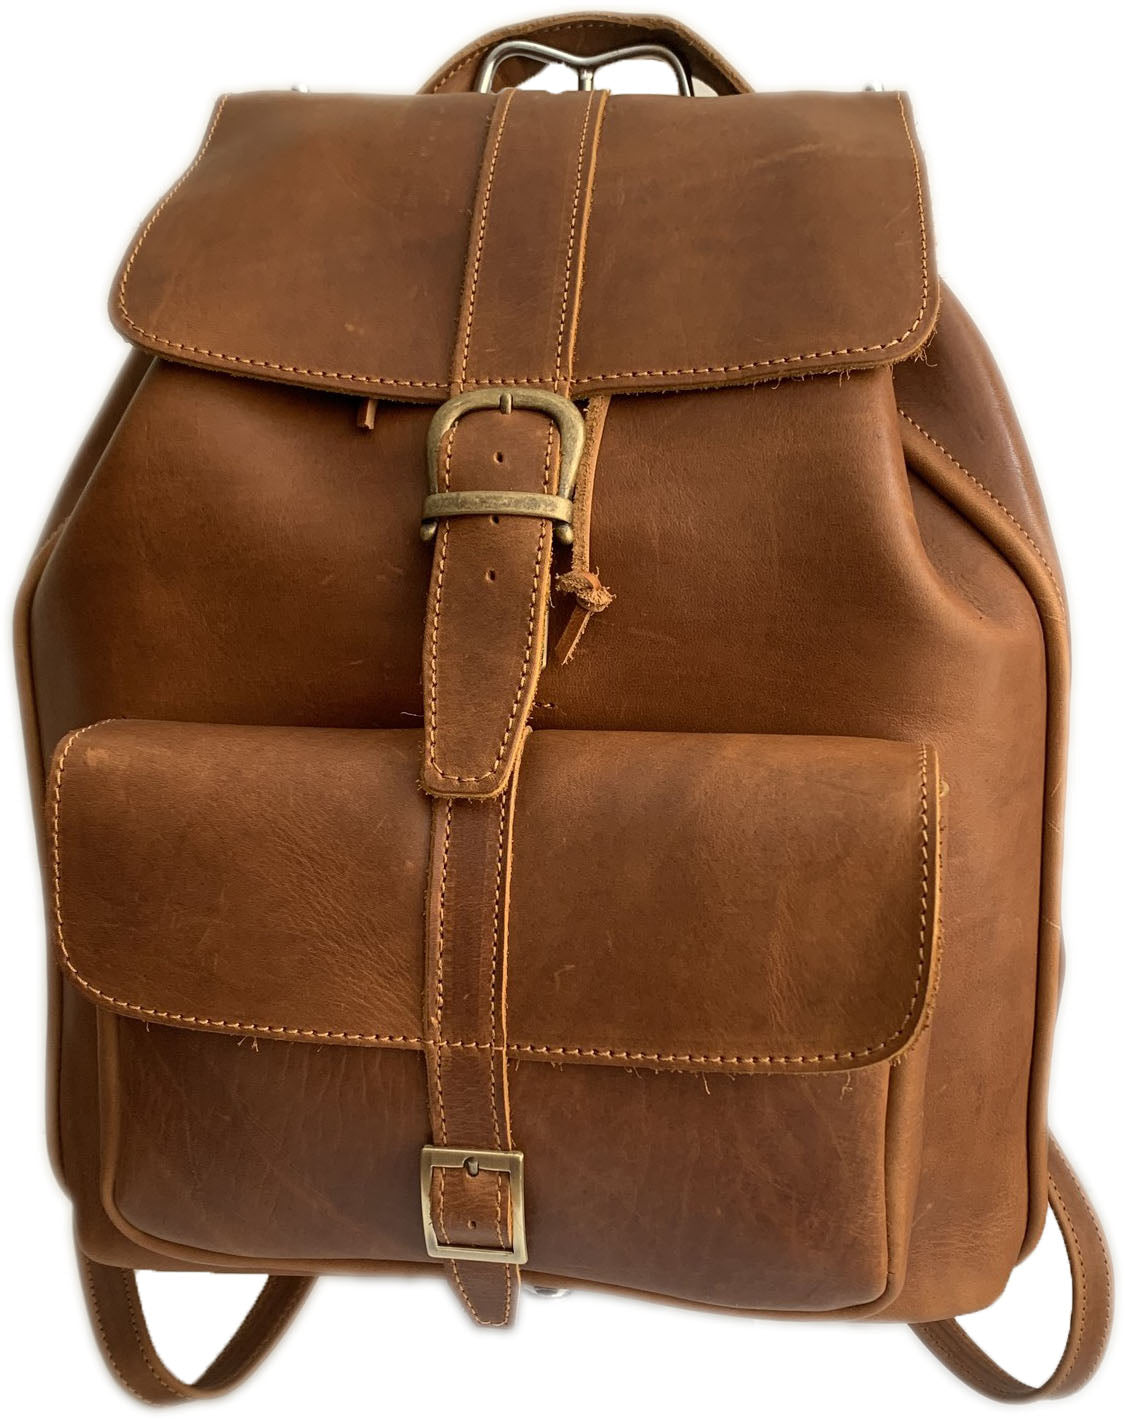 "Ippokratis" - Unisex bigsize backpack (rucksack) handcrafted from natural light brown leather WT/59T